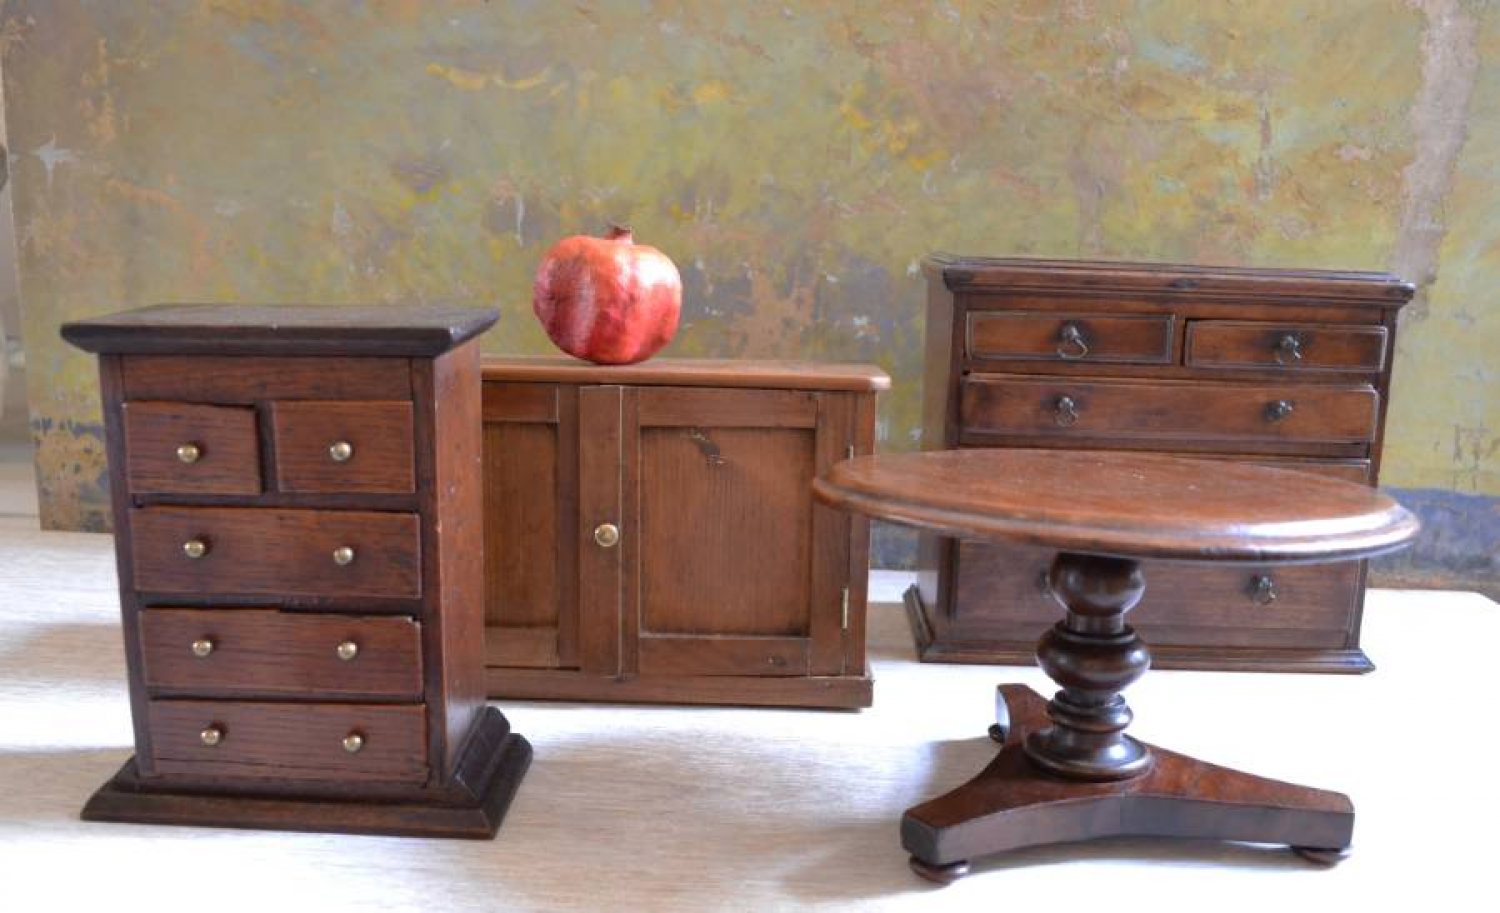 Collection of Miniature Antique Furniture